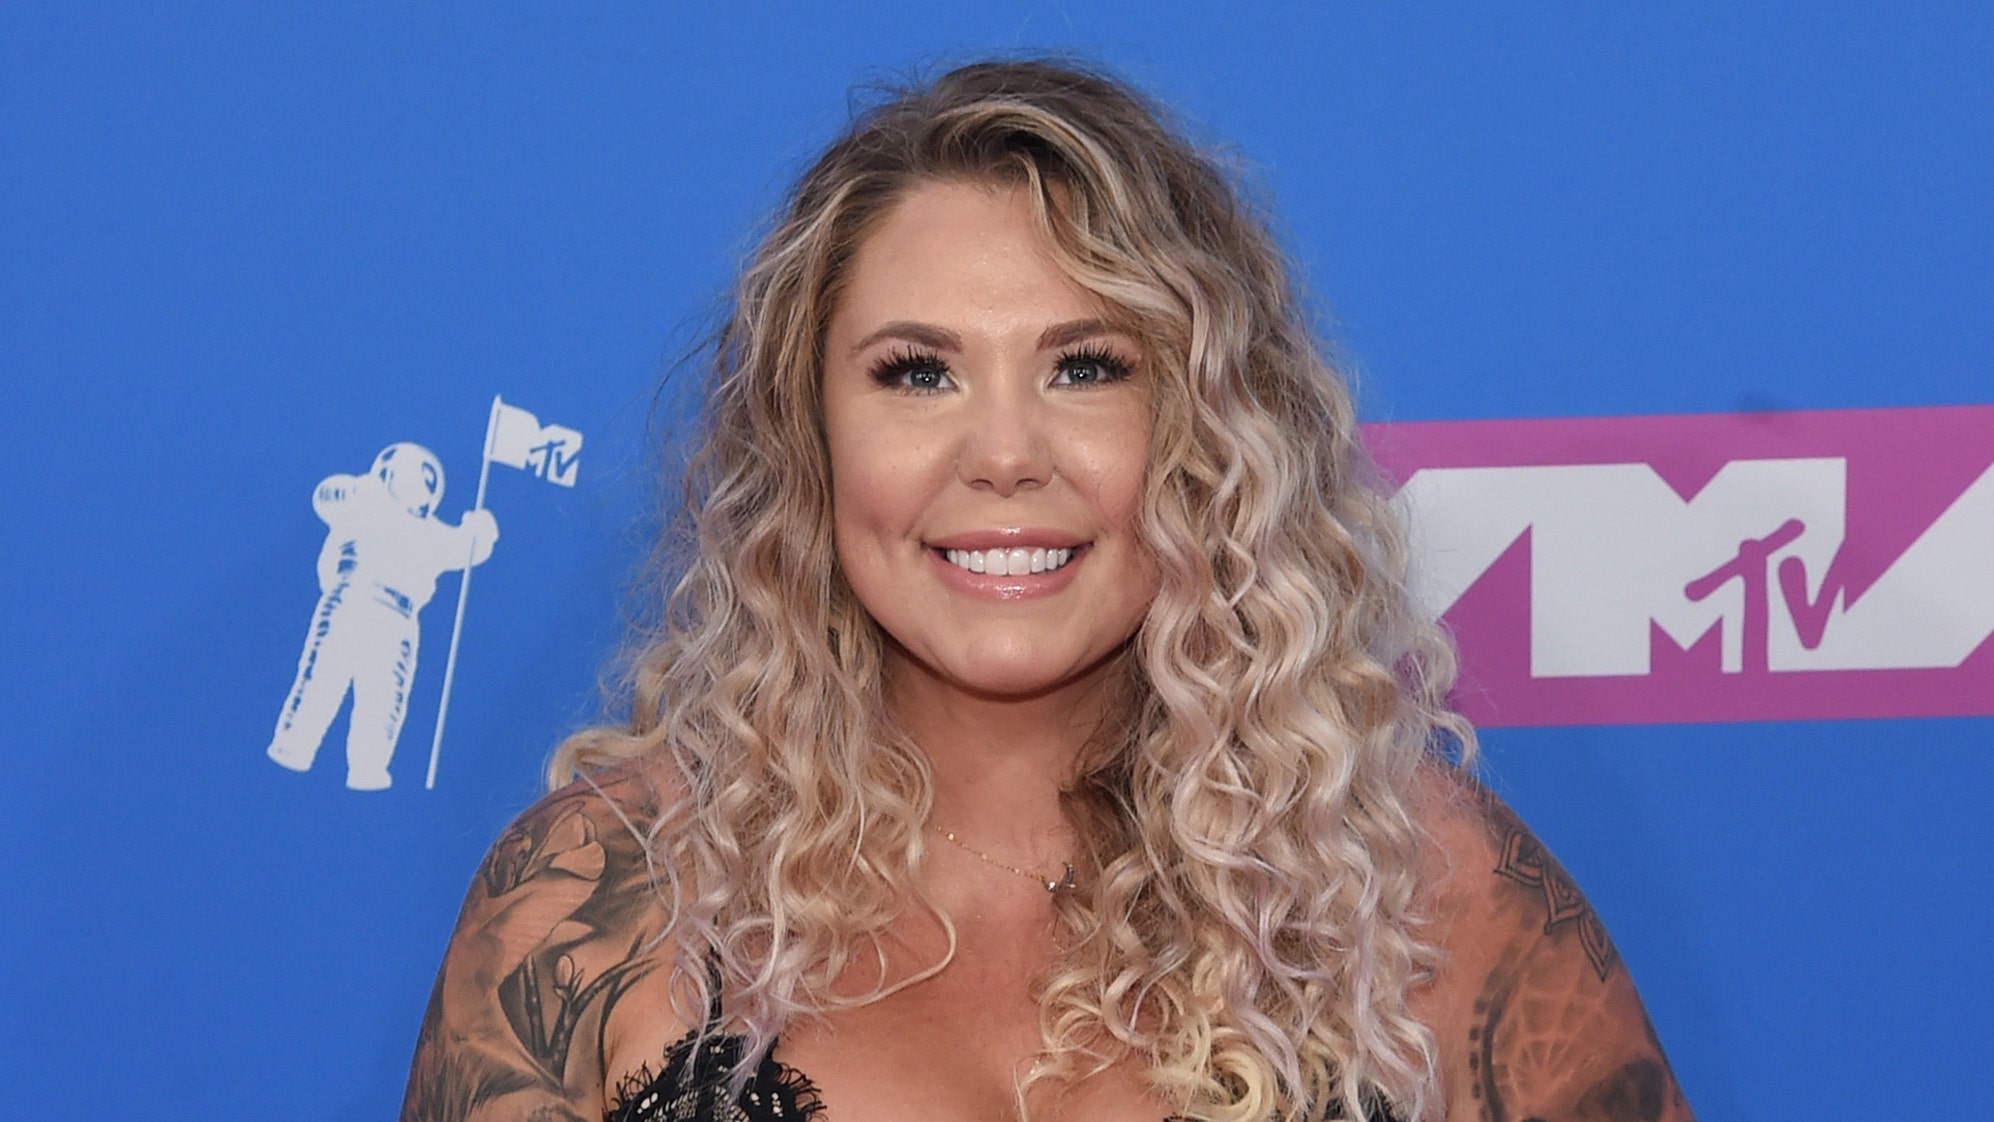 FOX NEWS: 'Teen Mom 2' star Kailyn Lowry arrested for allegedly punching son's father Chris Lopez